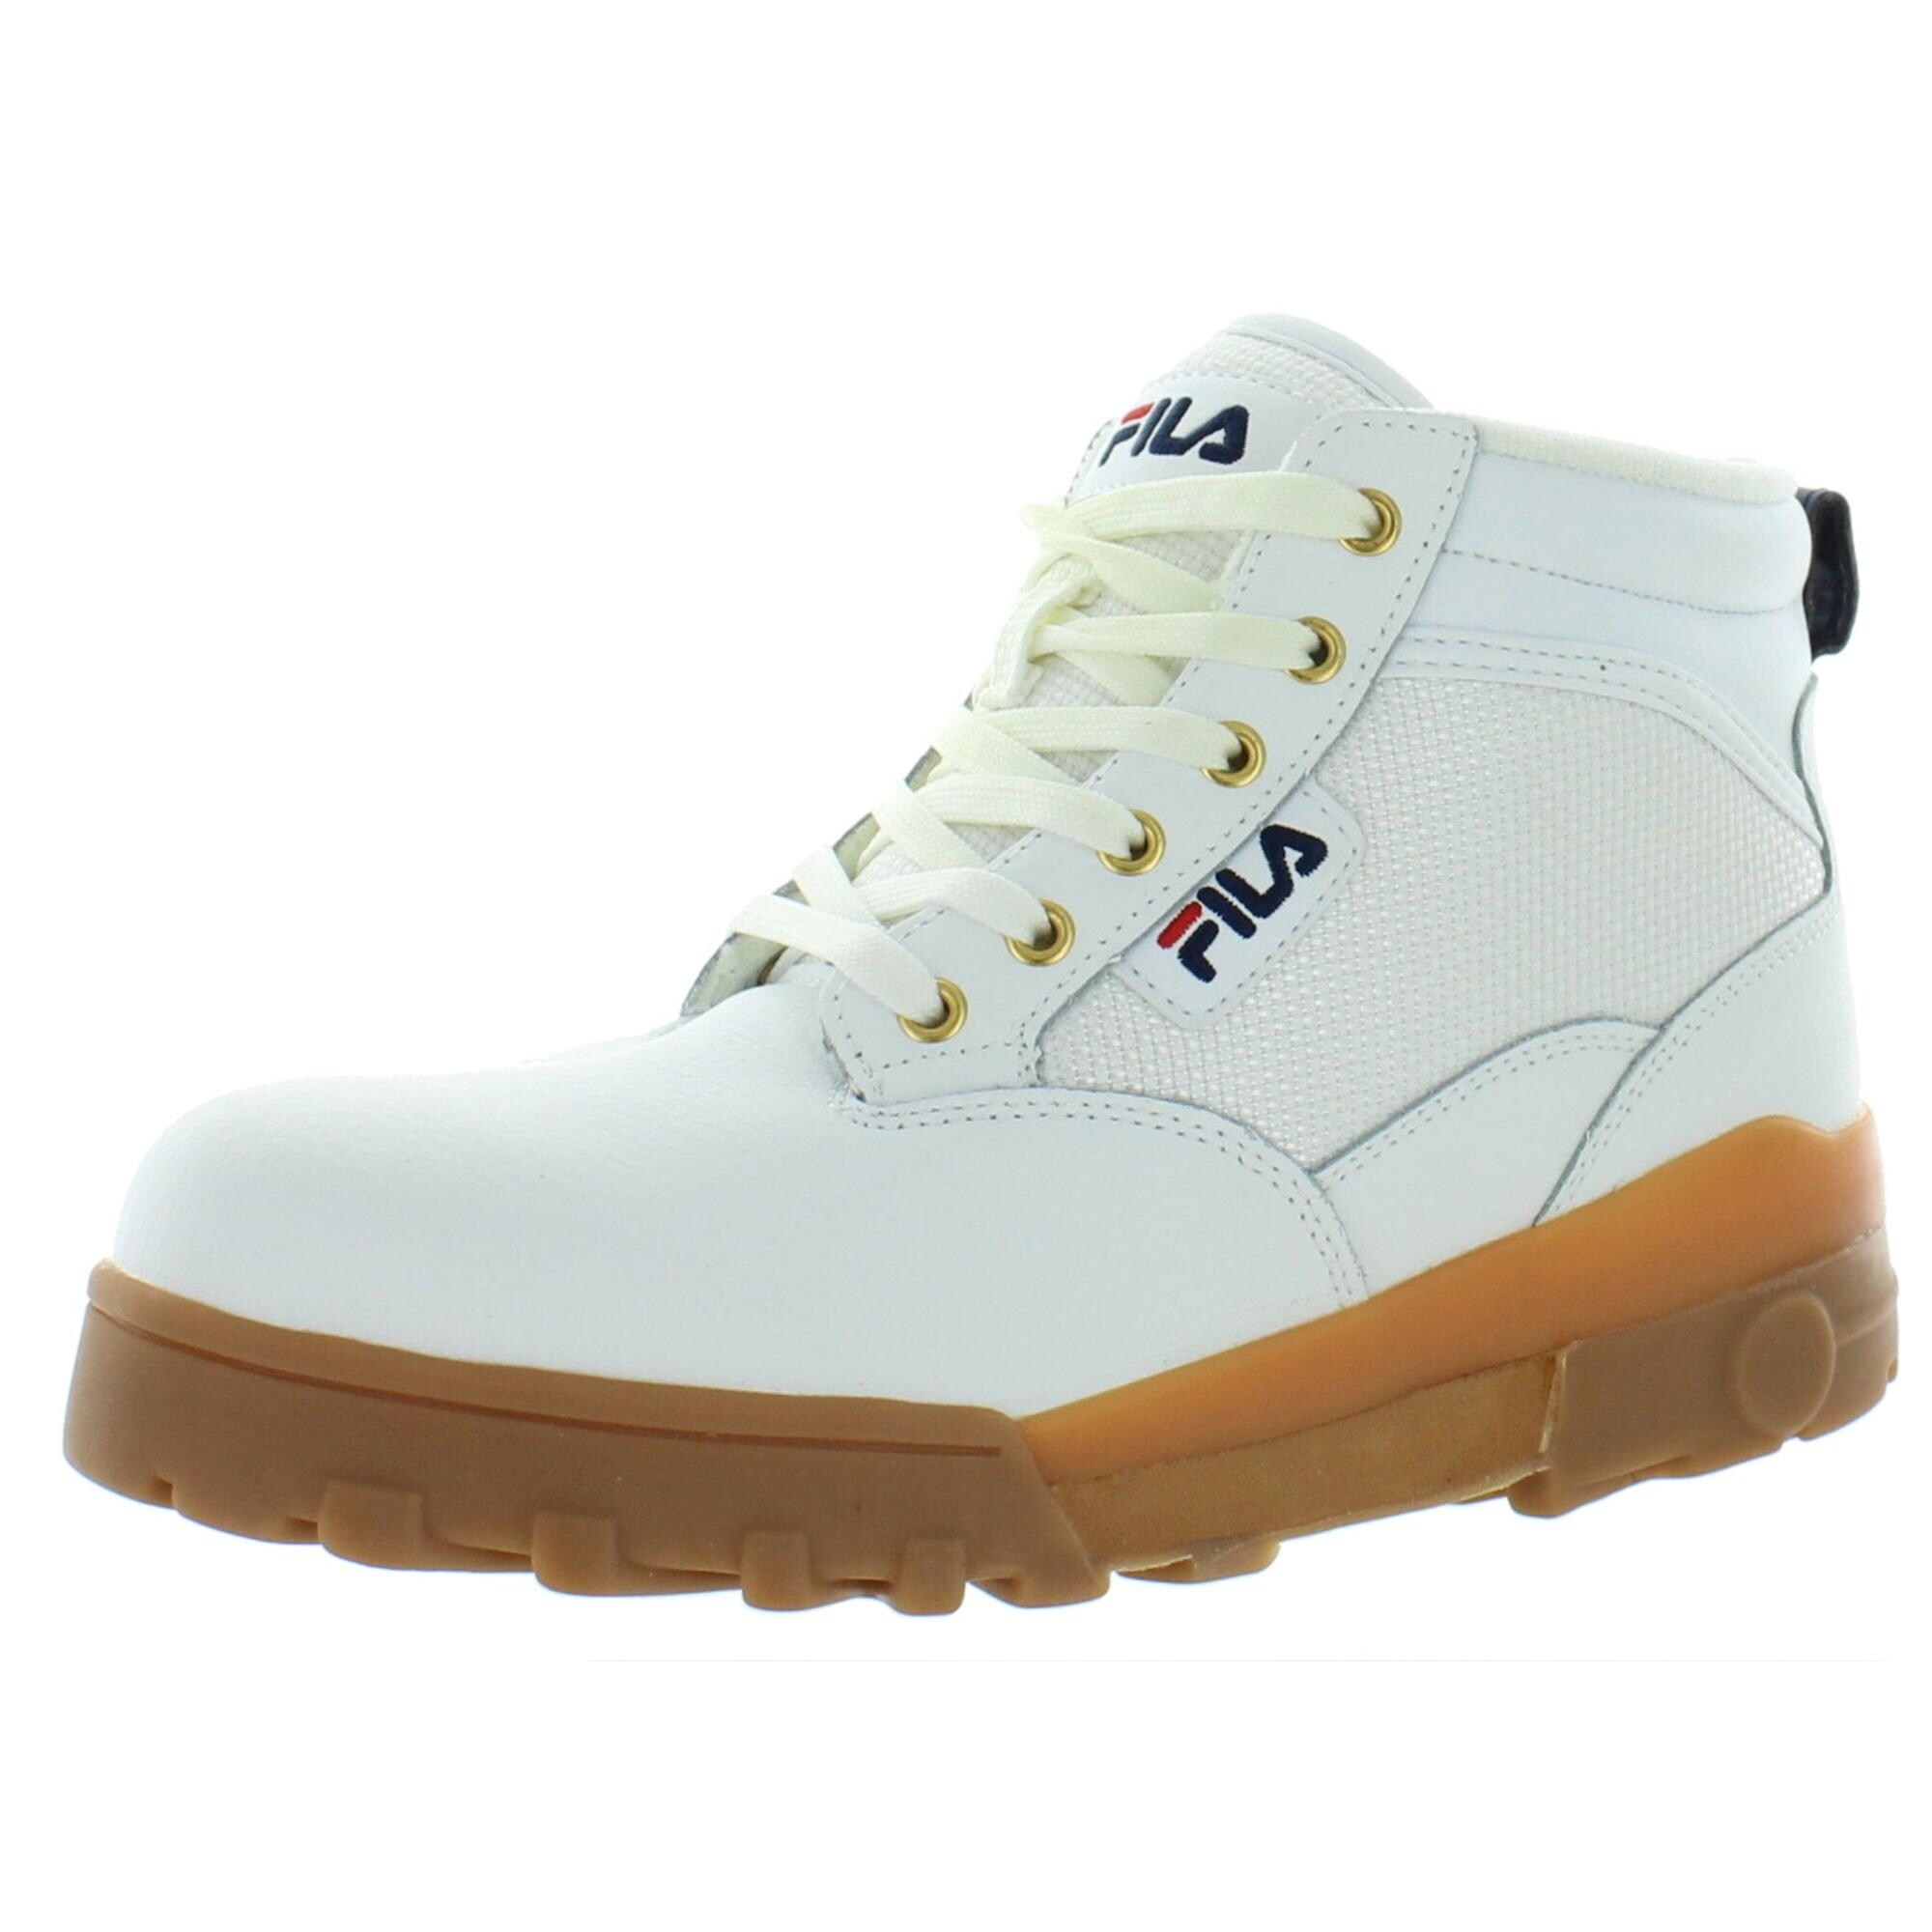 Fila Womens Grunge Shoes Leather - Navy/ Fila Red - Overstock - 33182290